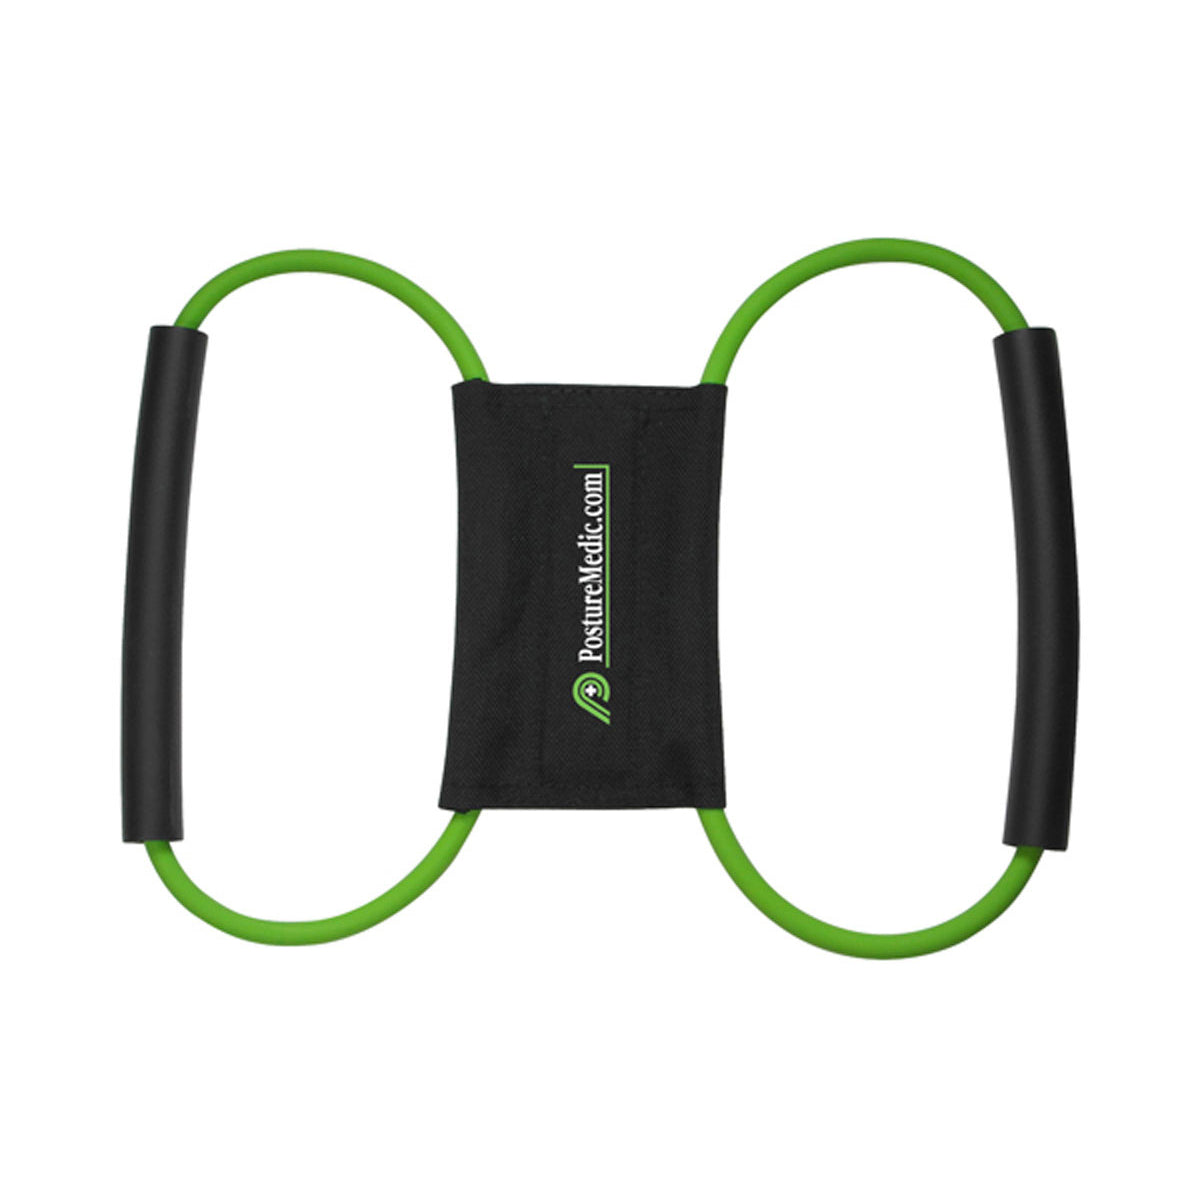 Mercase Posture Corrector 😊 - health and beauty - by owner - craigslist